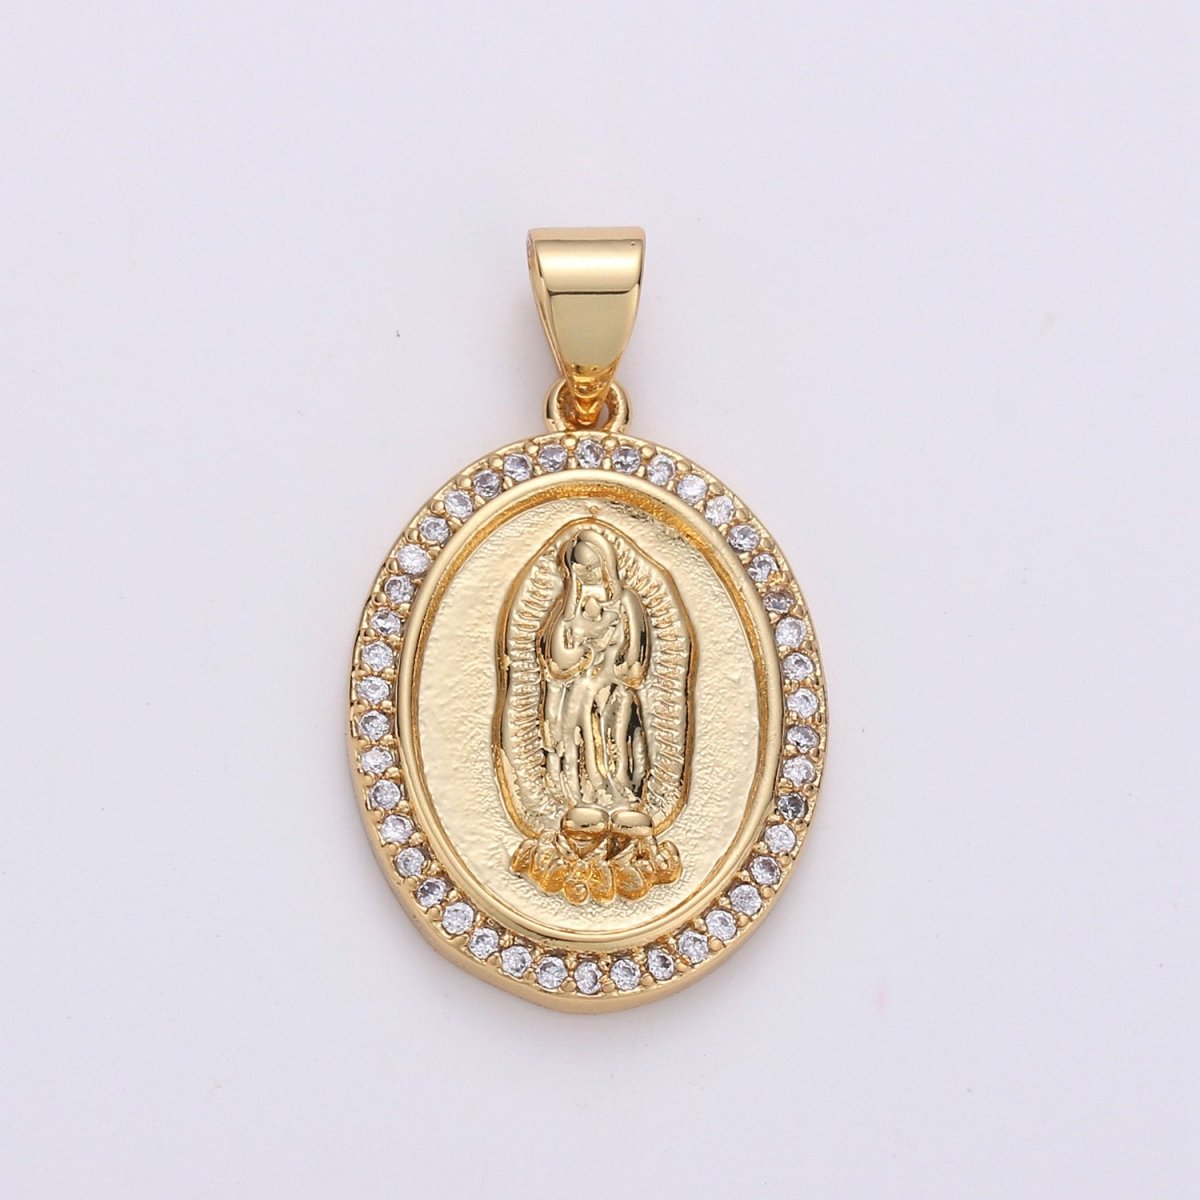 24K Gold Filled Virgin Mother Mary Pendant Micro Pave Lady of Guadalupe Medallion Necklace Charm for Religious Jewelry I-627 - DLUXCA